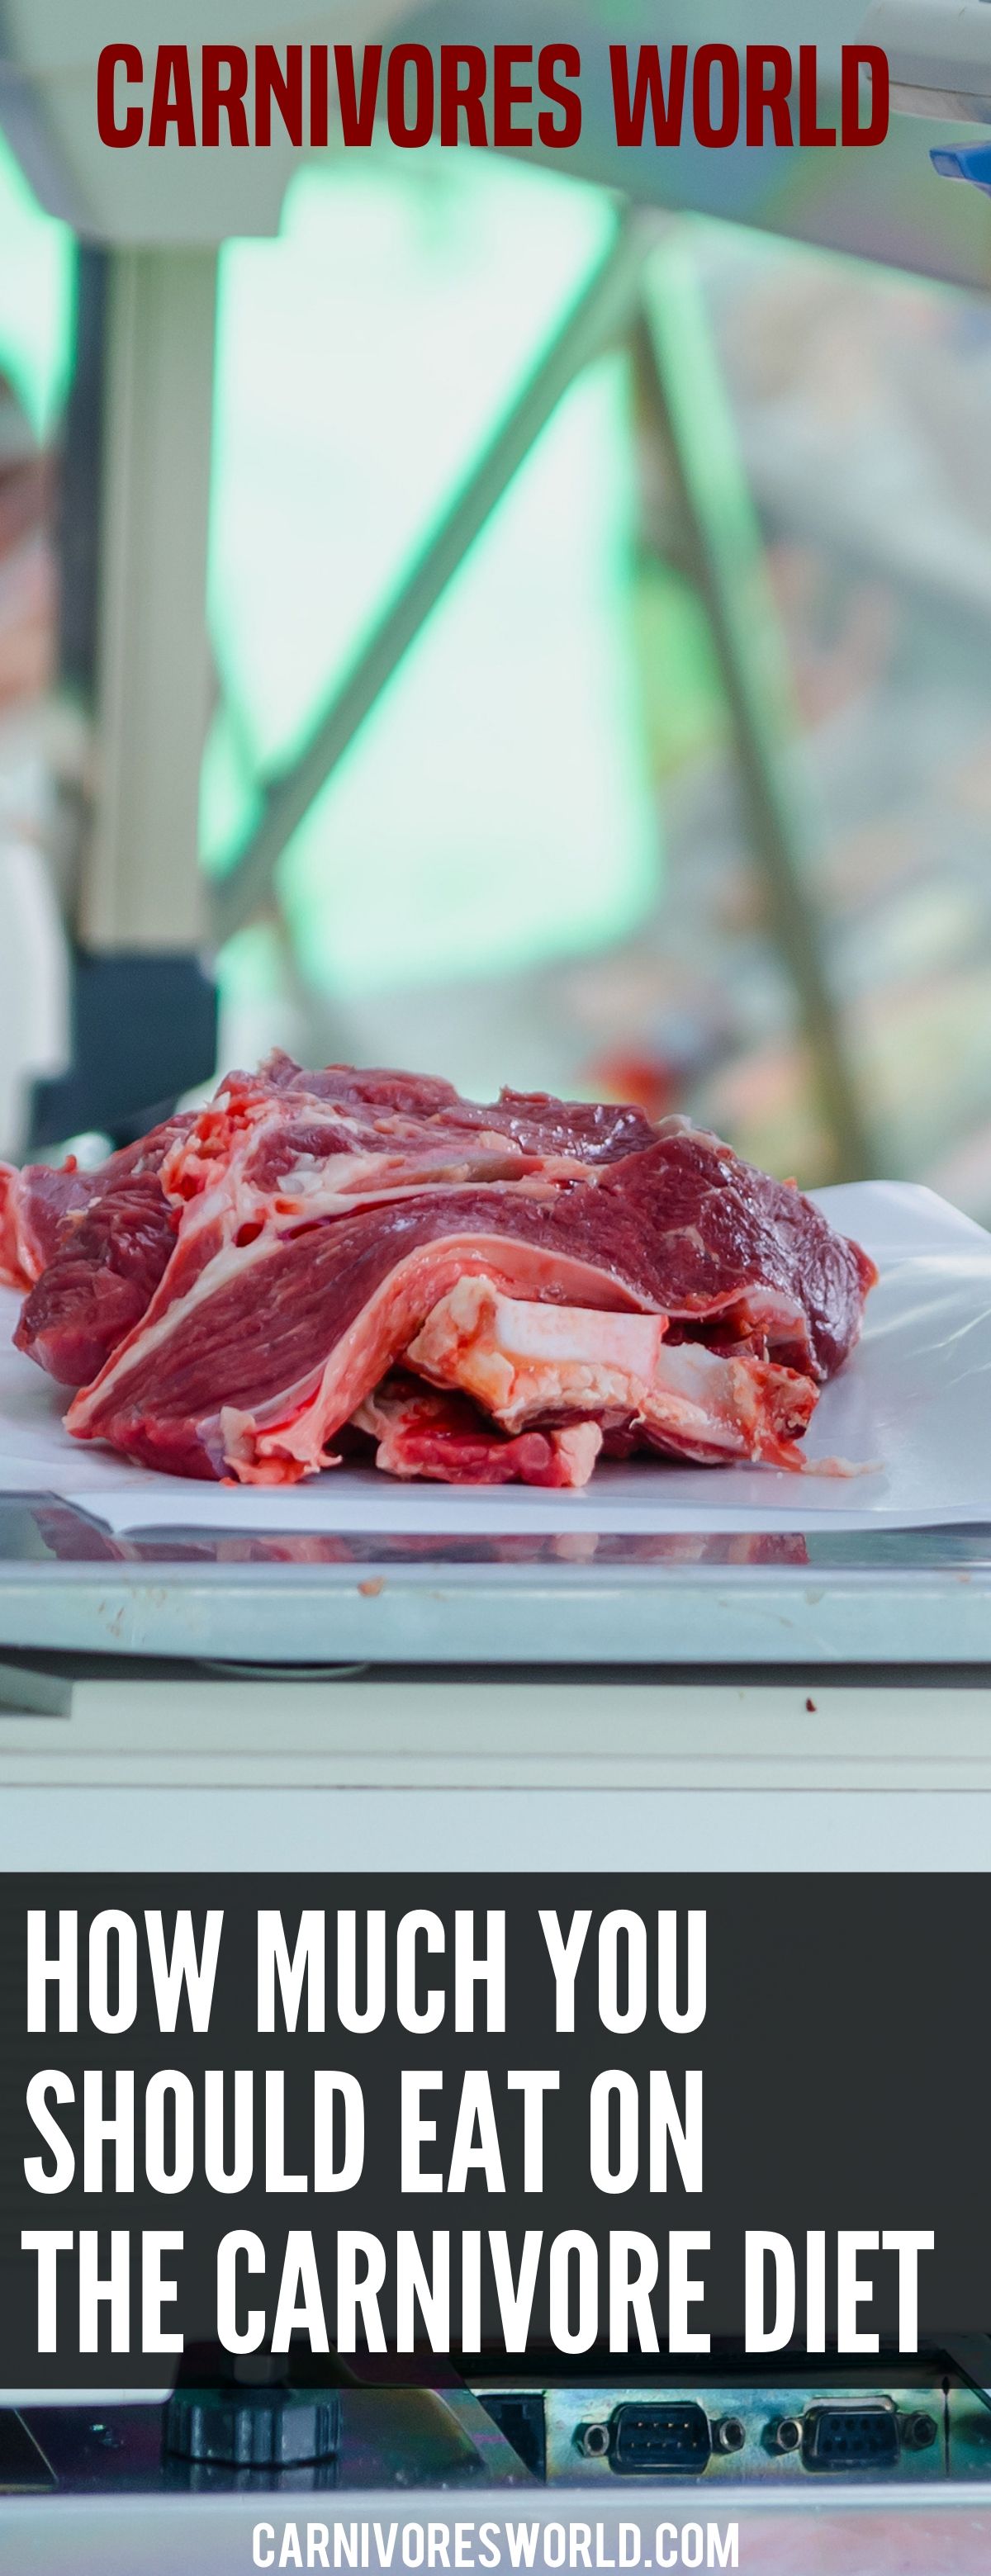 how much should you eat on the carnivore diet